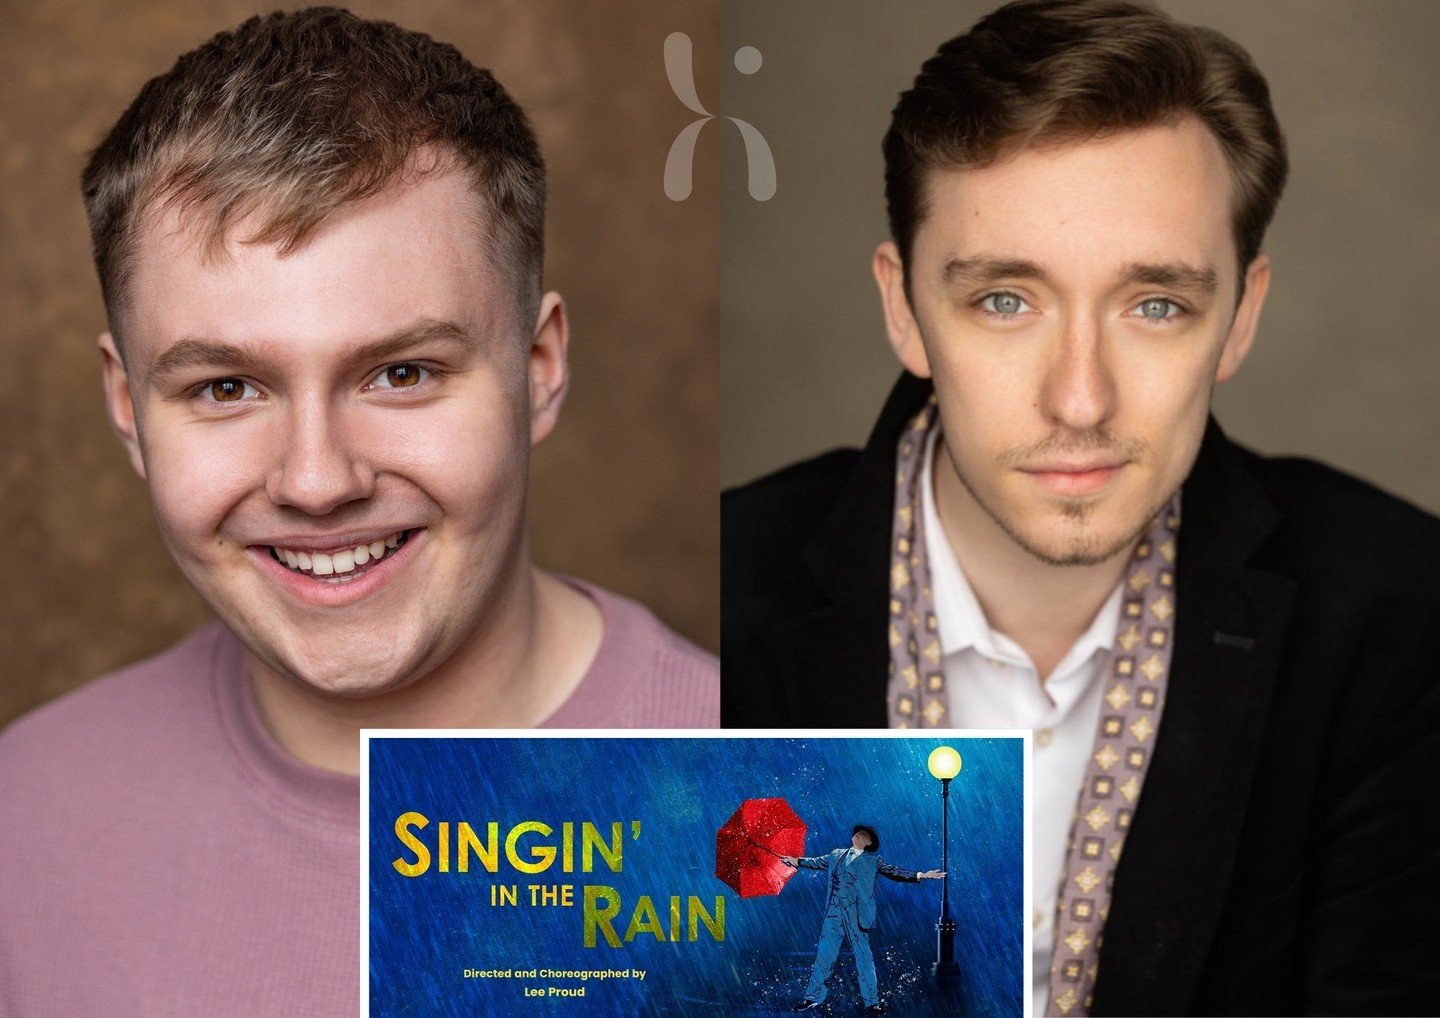 We&rsquo;d like to extend a huge congratulations to Hammond Professional Musical Theatre and Professional Dance graduates Joel Wilding and Michael Dean Wilson on gaining coveted roles in the Kilworth House production of SINGIN&rsquo; IN THE RAIN!⁠
⁠
